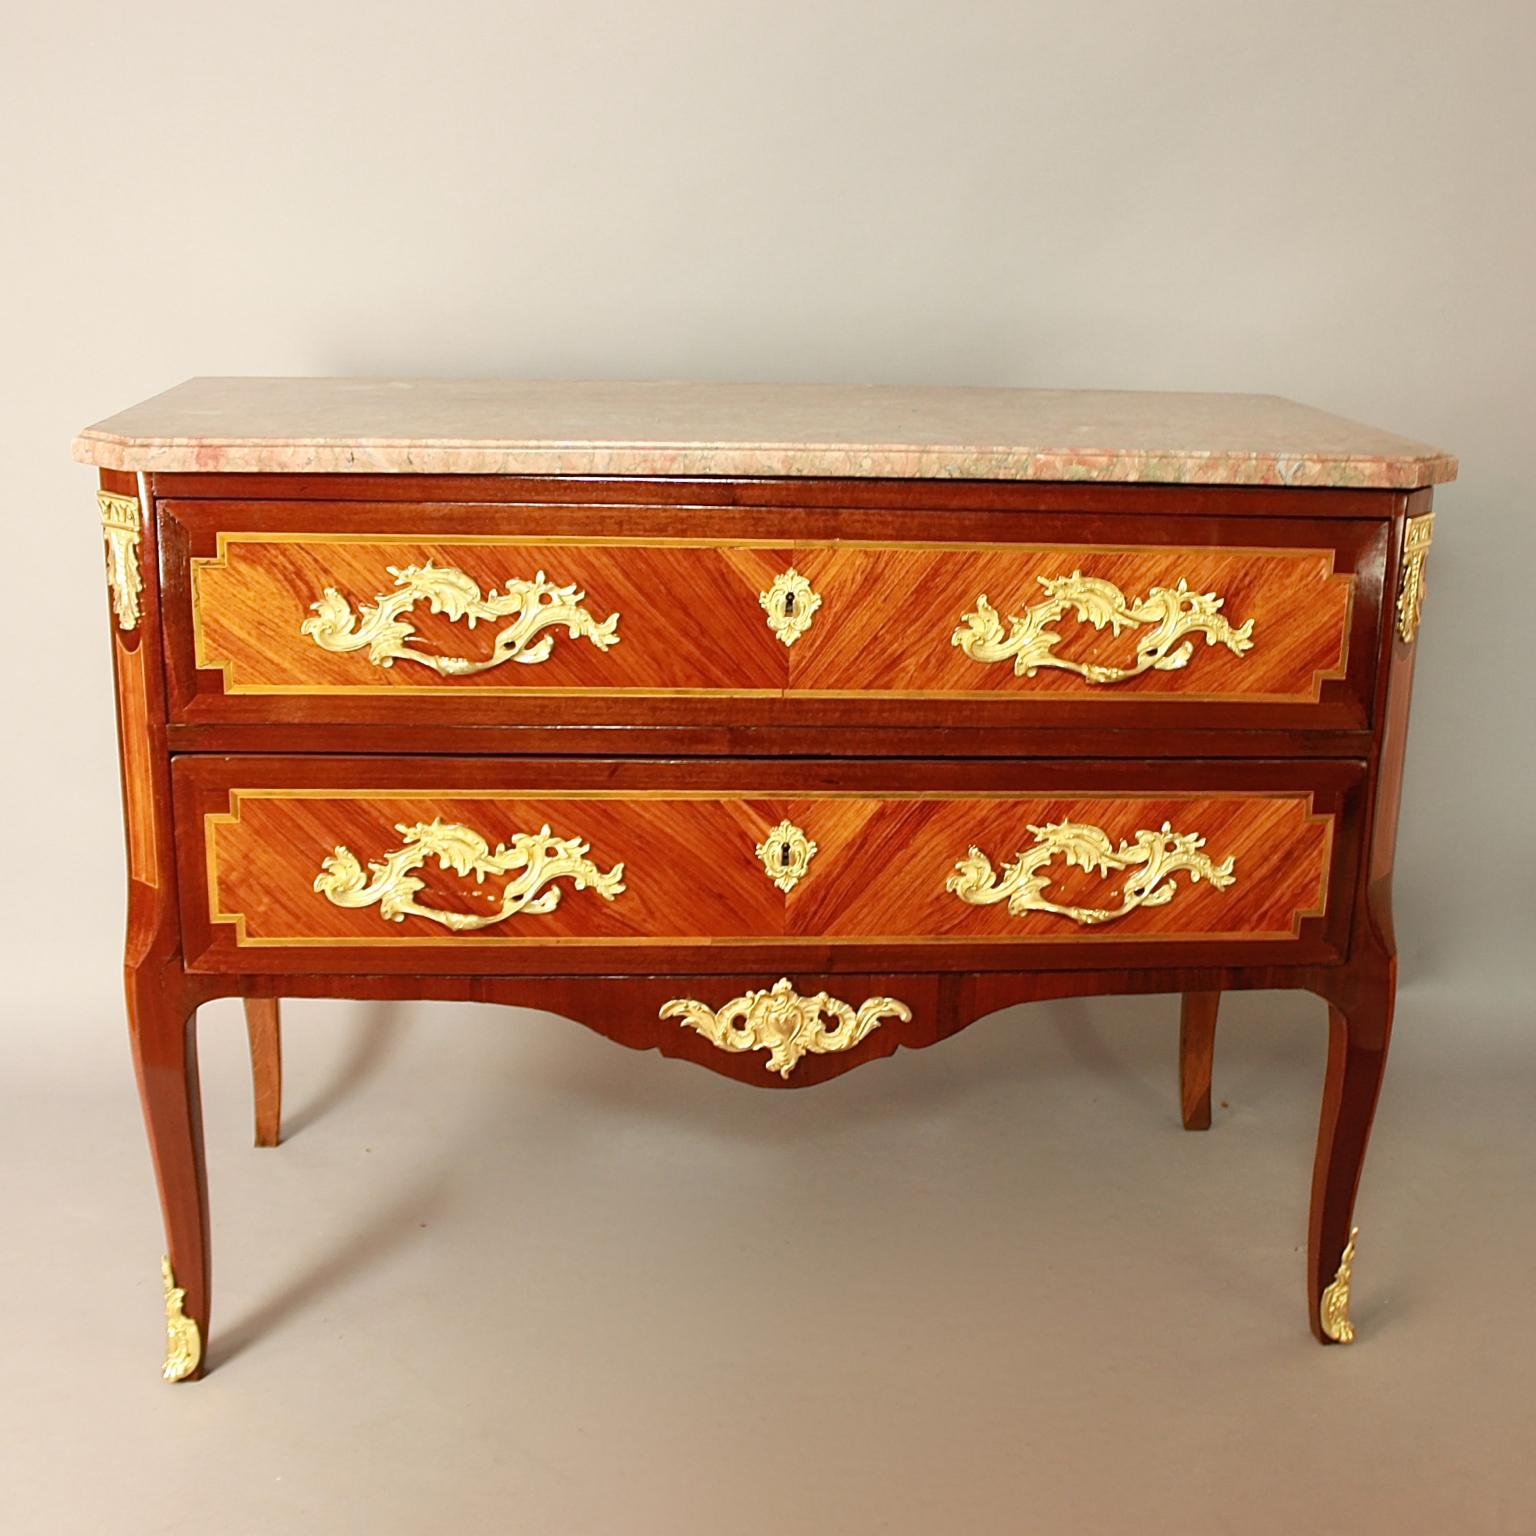 18th Century French Louis XV/Transition Marquetry Gilt Bronze Commode

An 18th century gilt bronze-mounted marquetry transition style commode with a moulded marble top above two long drawers, each veneered à deux faces and inlaid with geometric